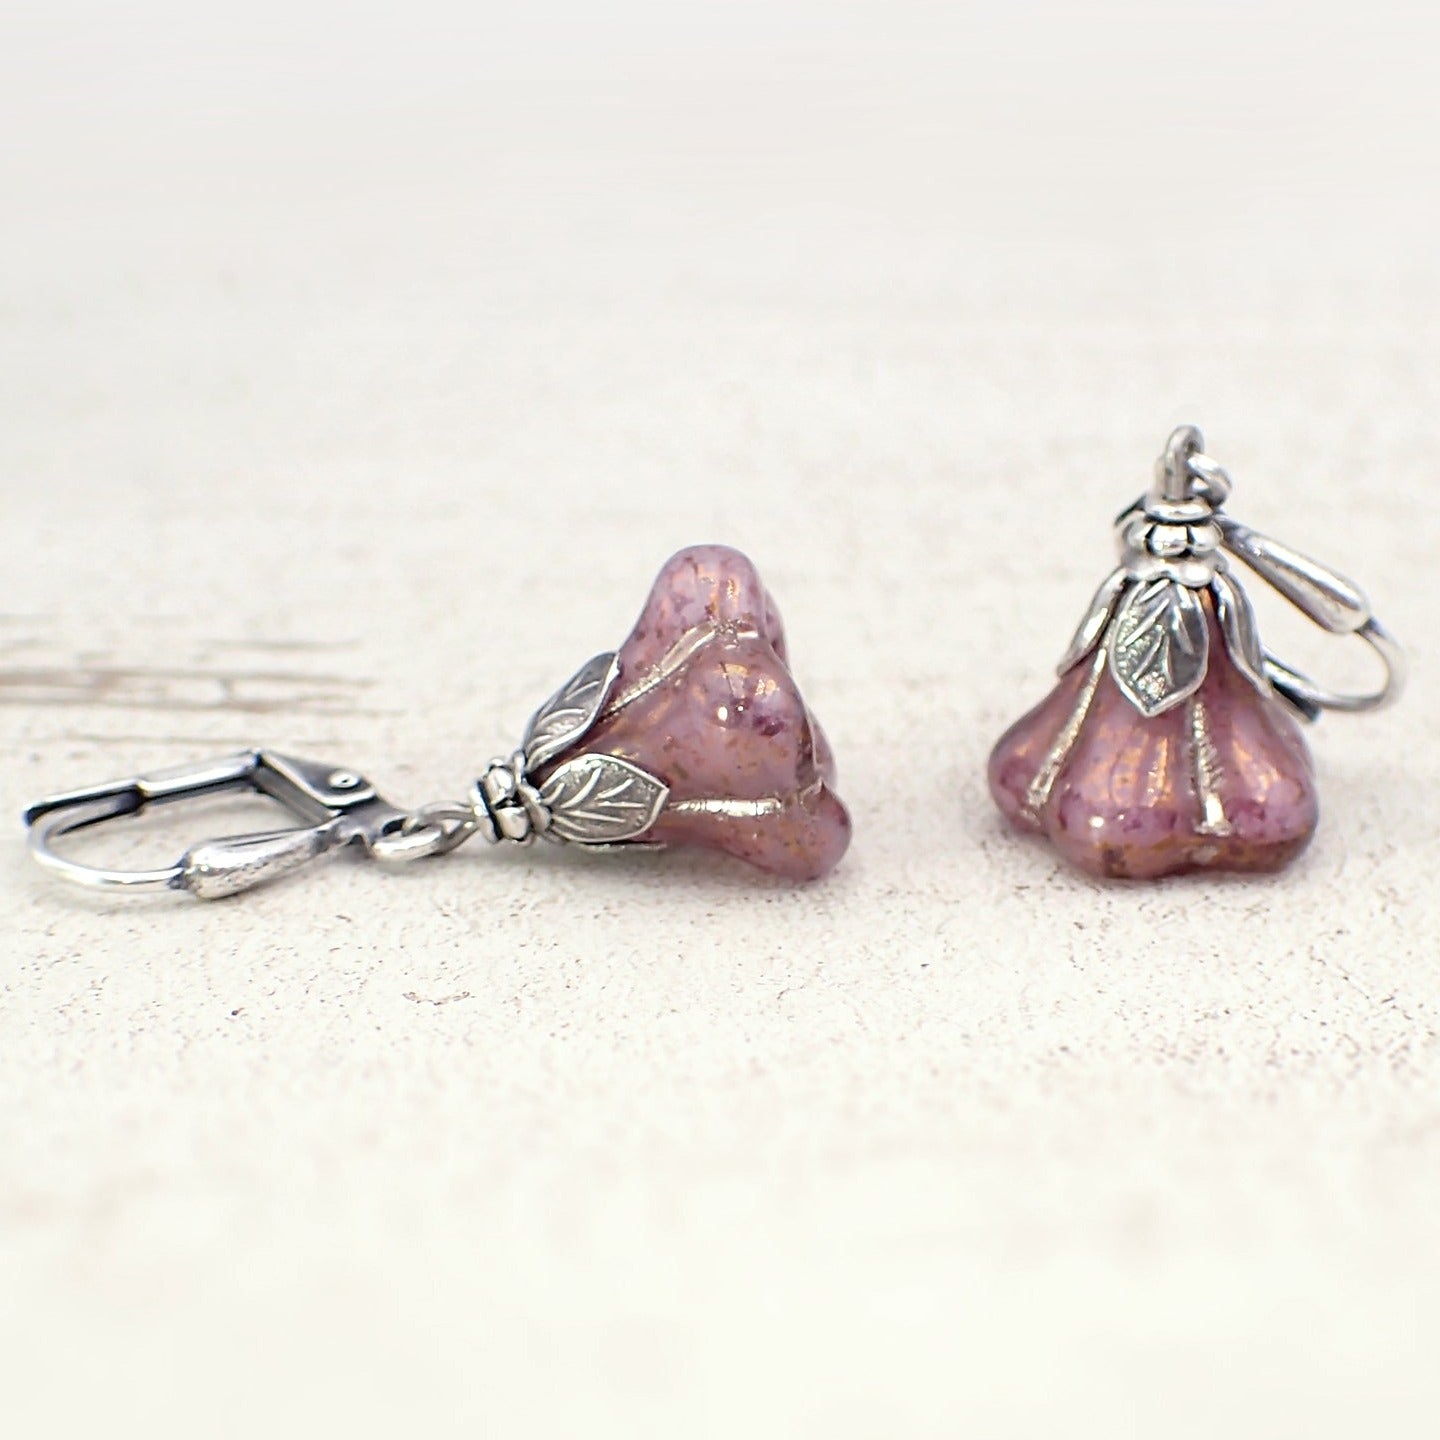 Czech Glass Flower Earrings with Dusty Lavender Pink Artisan Czech Beads and Antiqued Silver Metal